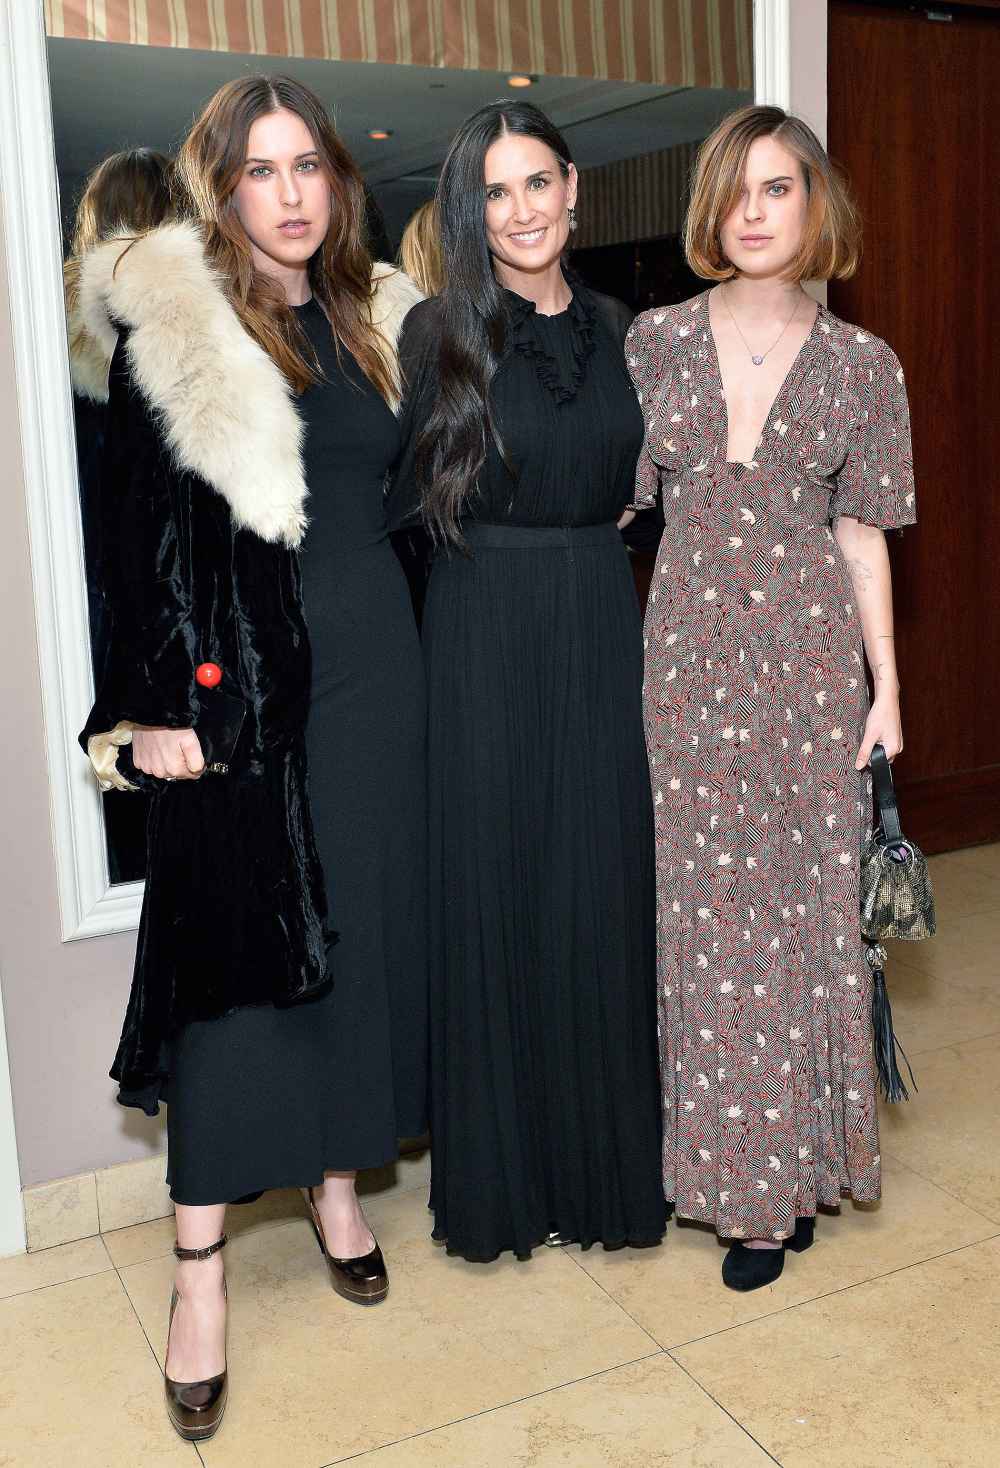 Scout Willis, Demi Moore and Tallulah Willis